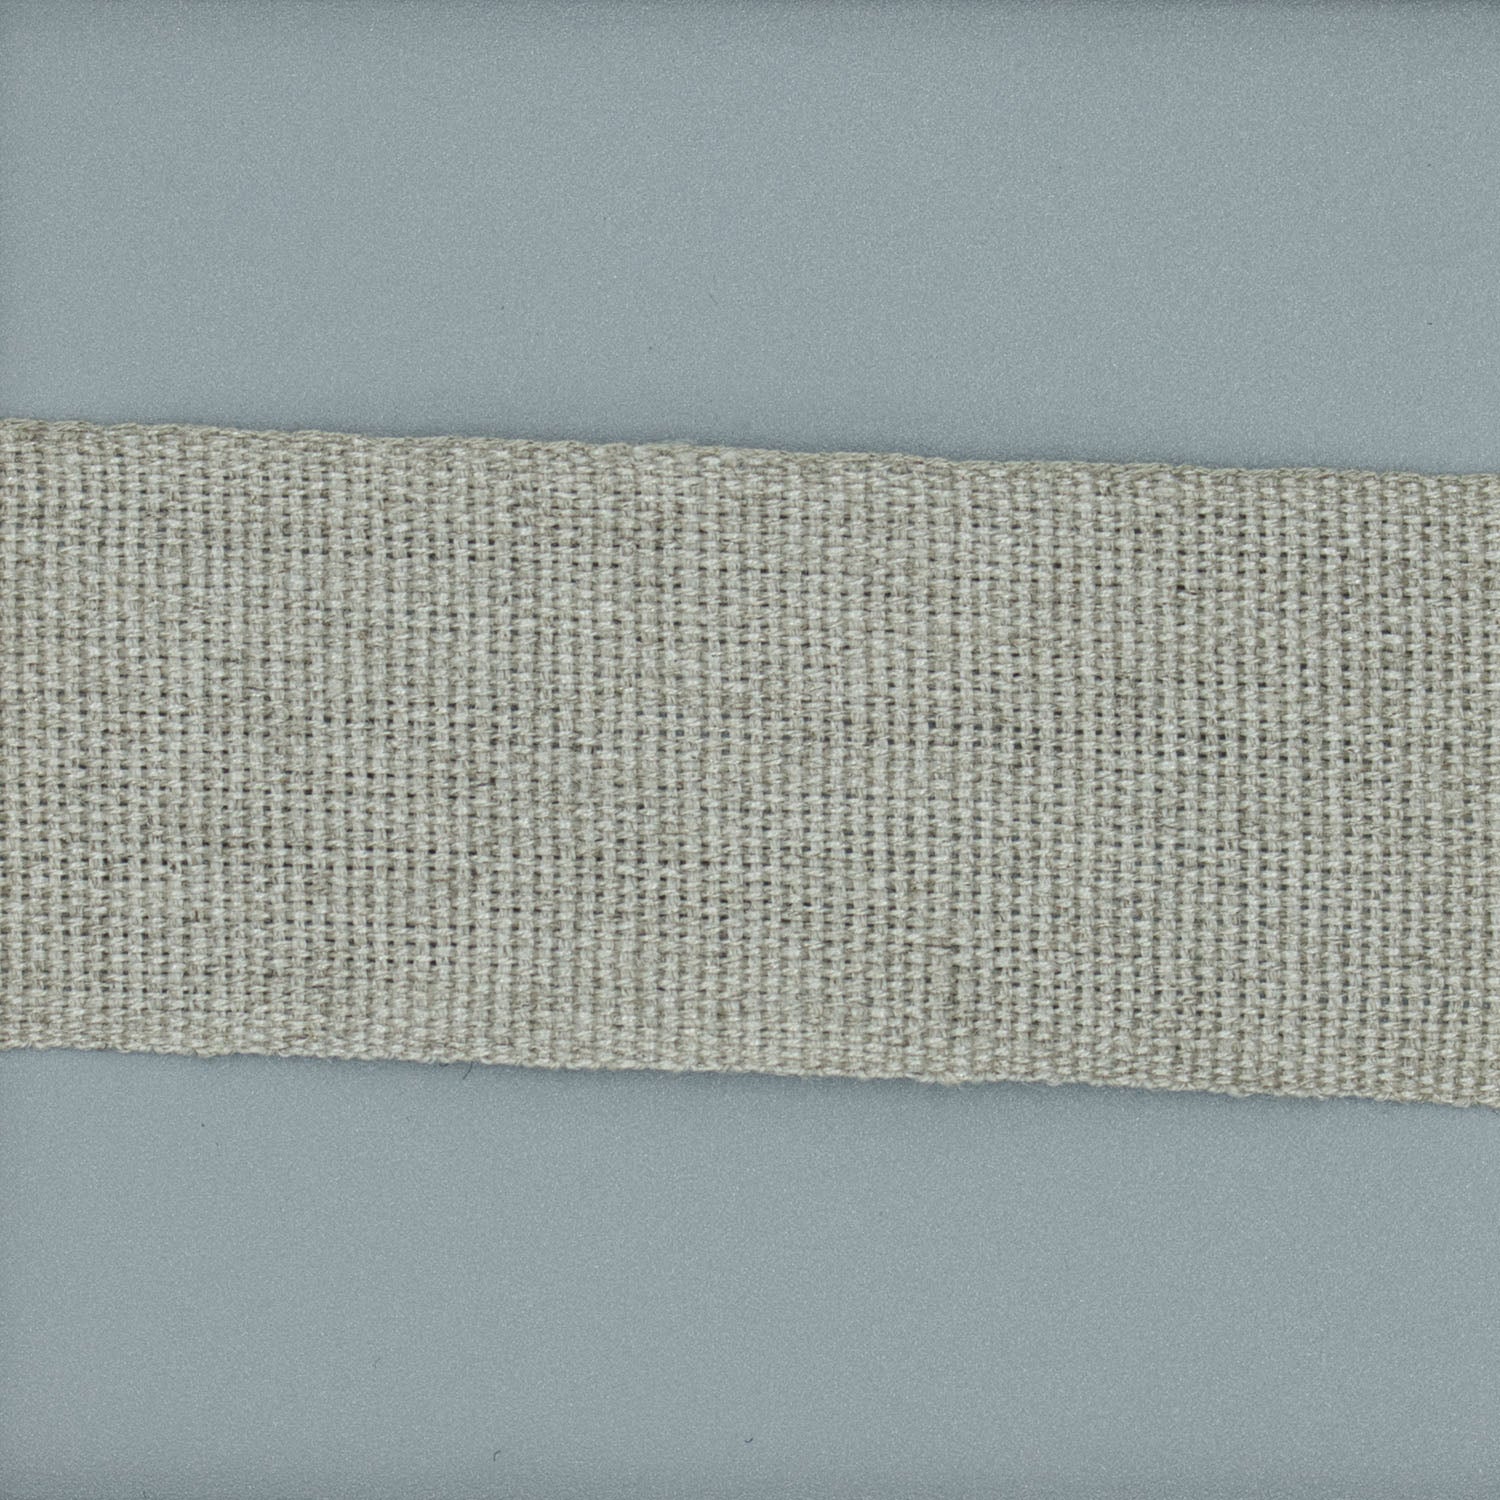 Natural linen plain weave tape in 1-1/4 inch